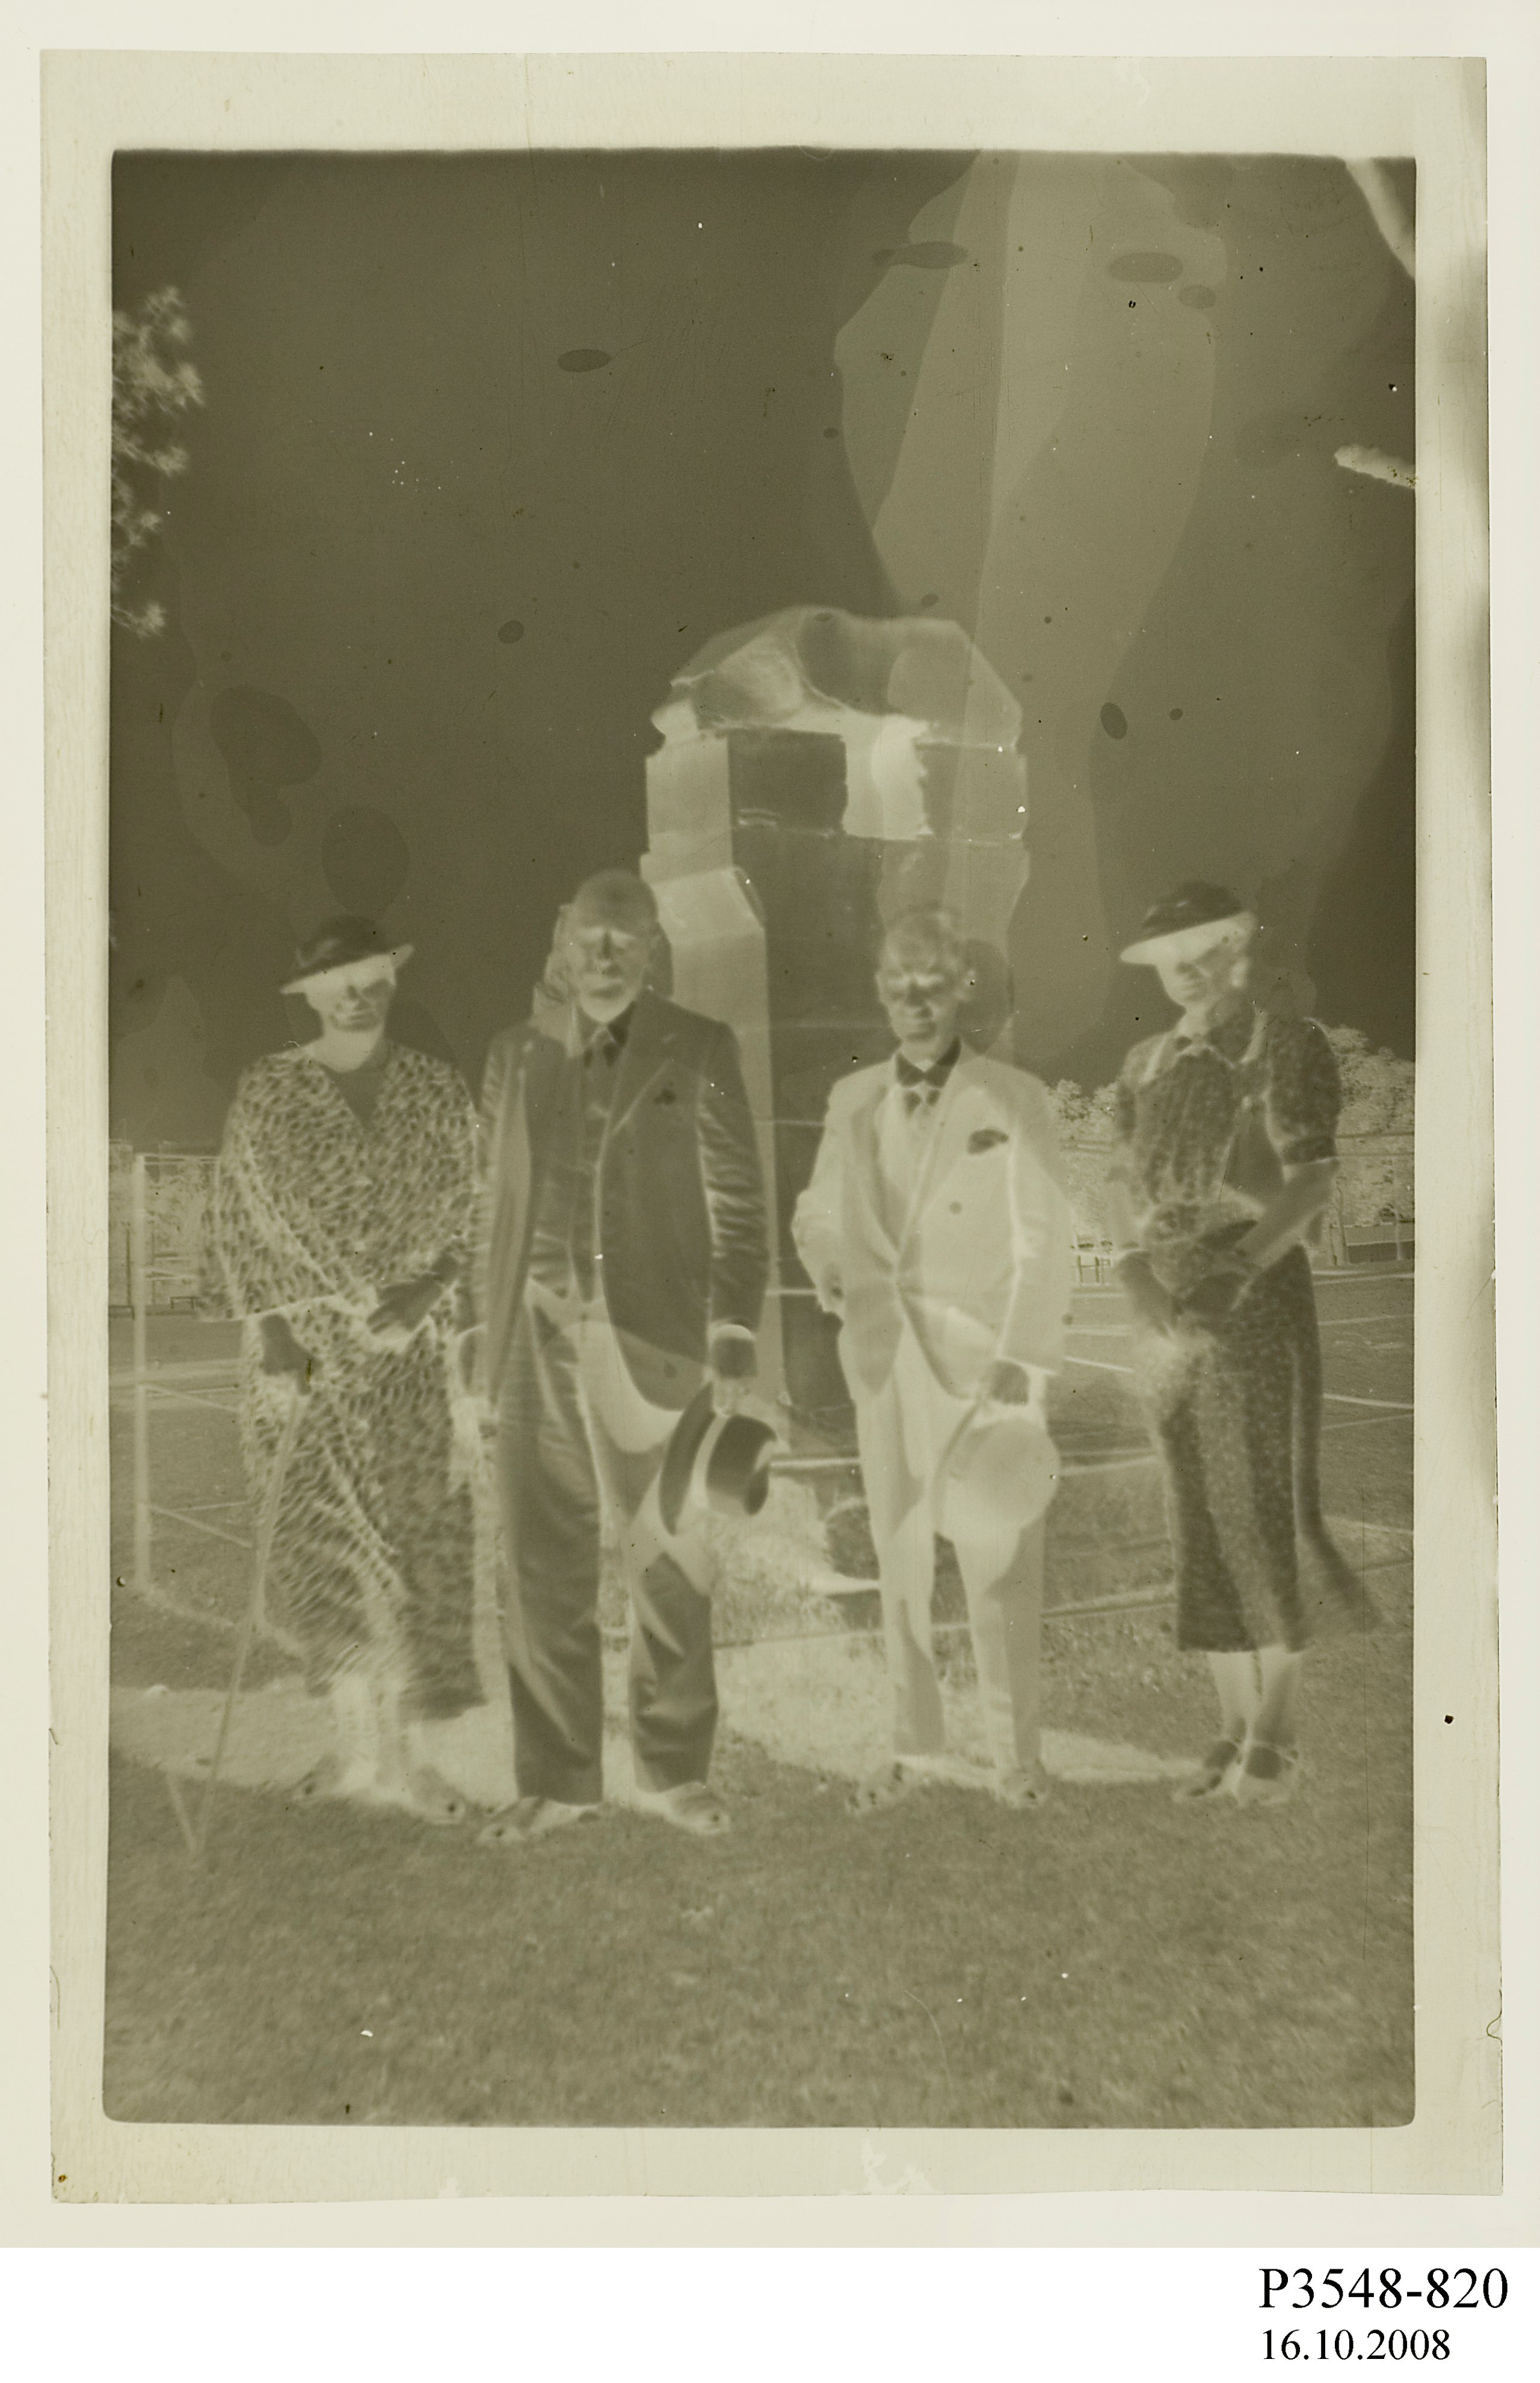 Photographic negative of James Nangle and friends